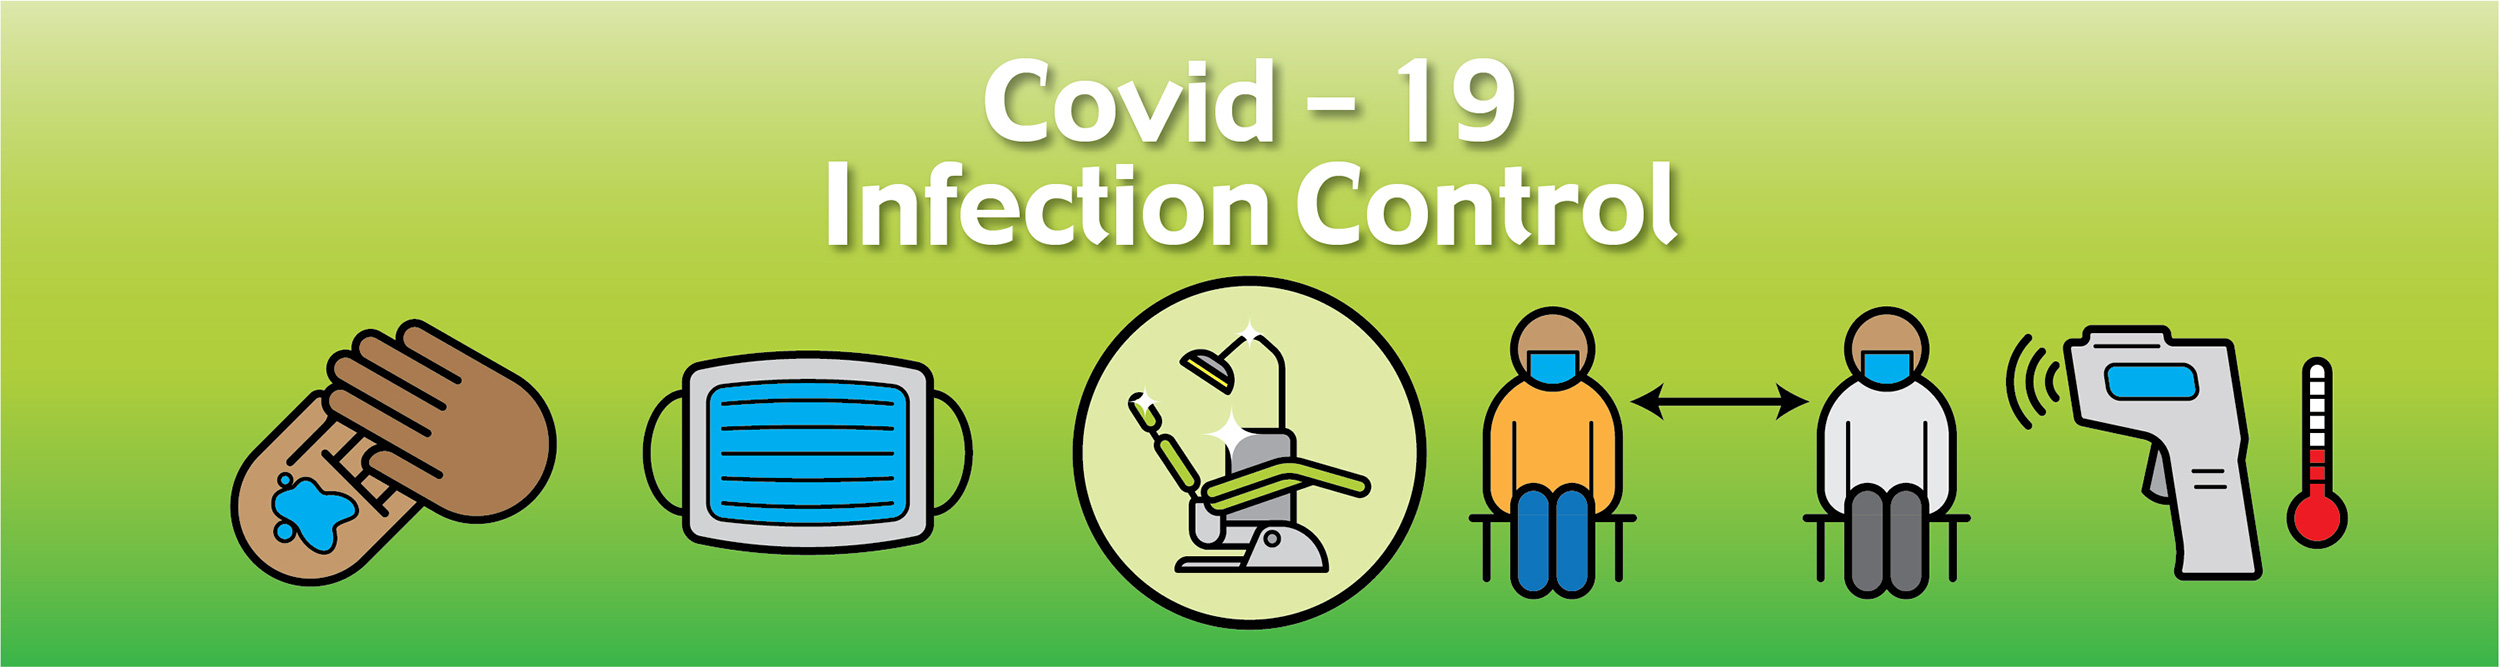 Covid 19 Infection control